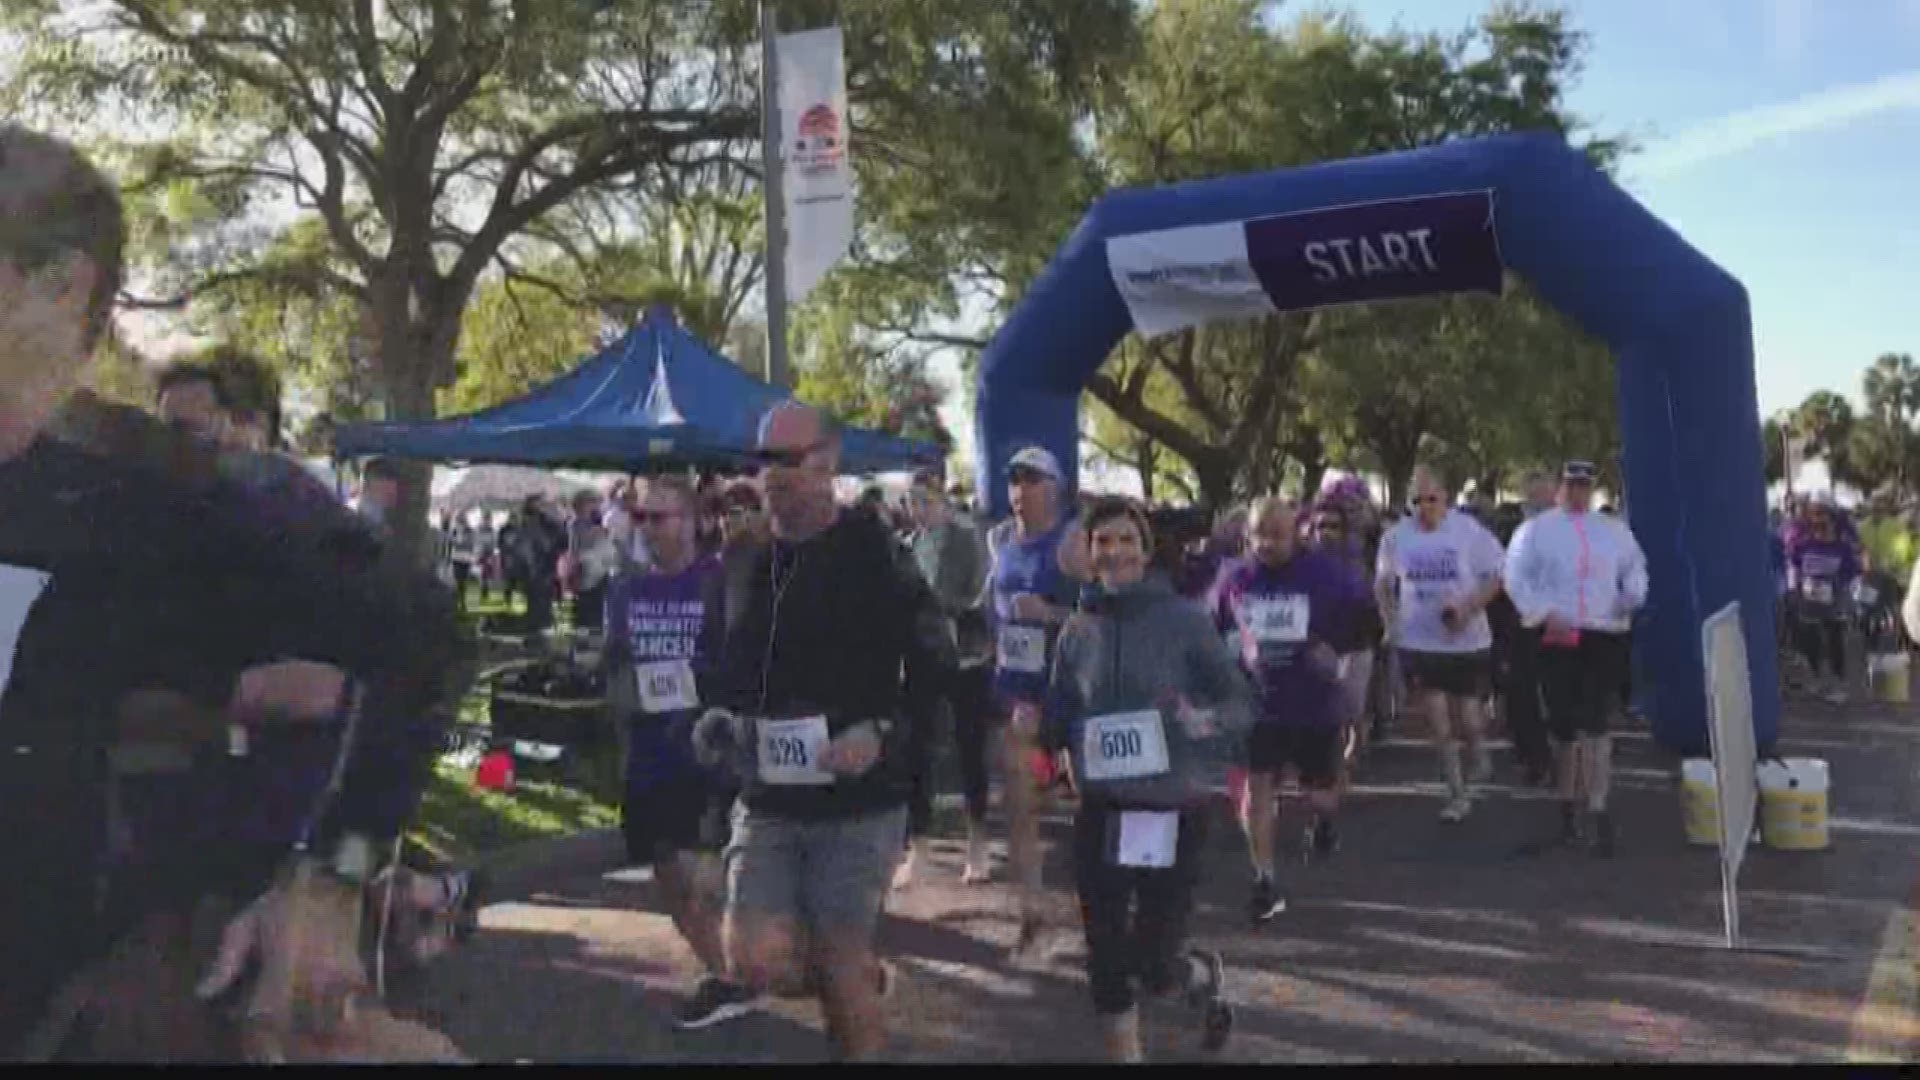 The annual 5K in downtown St. Pete raised more than $259,000 for research, clinical trials and support for families of loved ones diagnosed with pancreatic cancer.